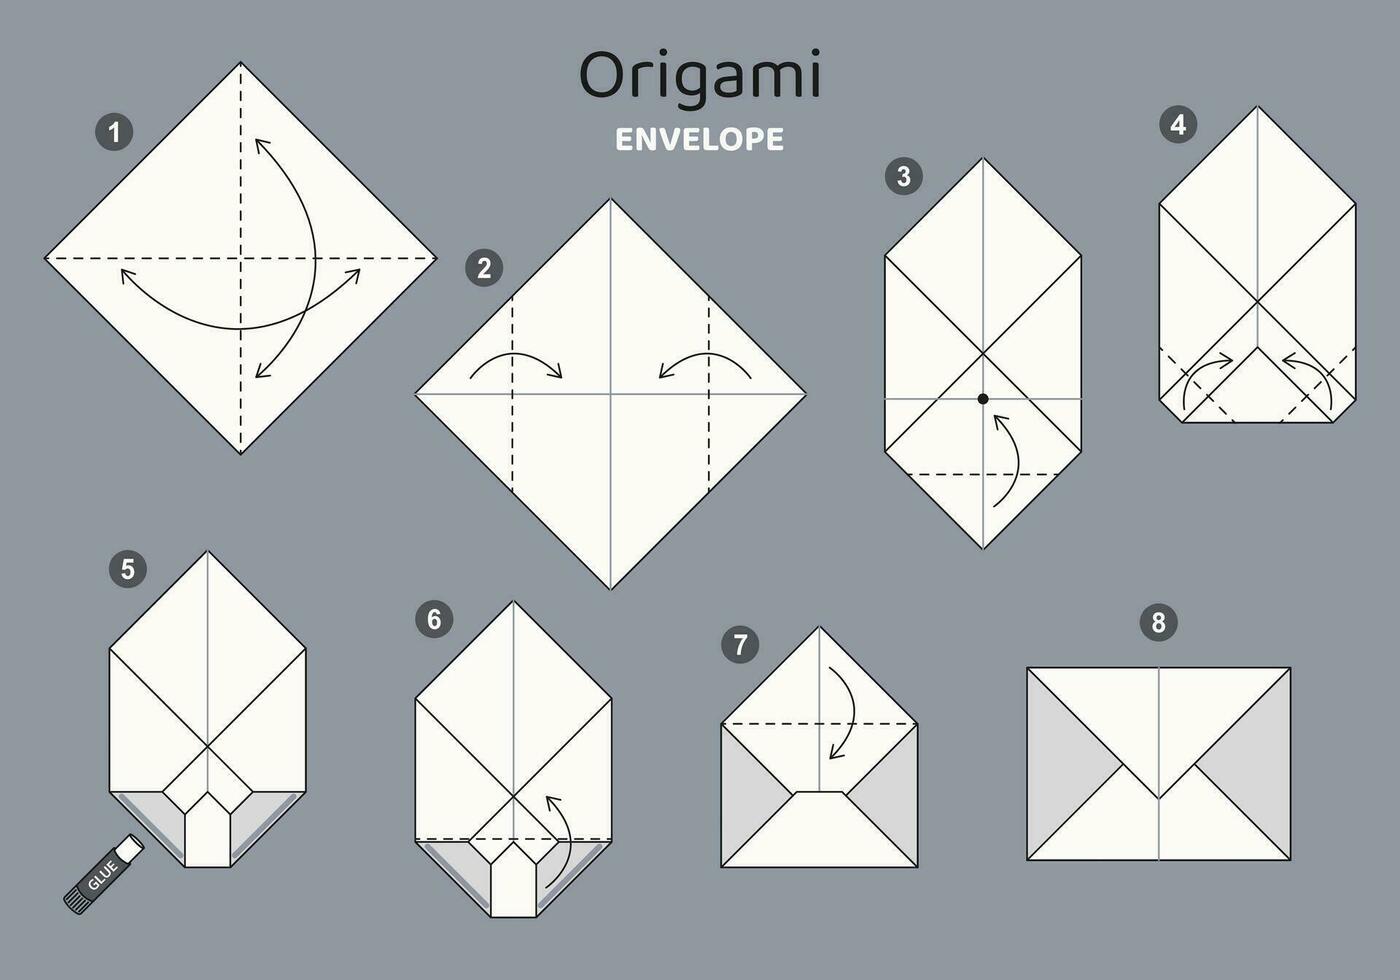 Envelope origami scheme tutorial moving model on grey backdrop. Origami for kids. Step by step how to make a cute origami envelope. Vector illustration.